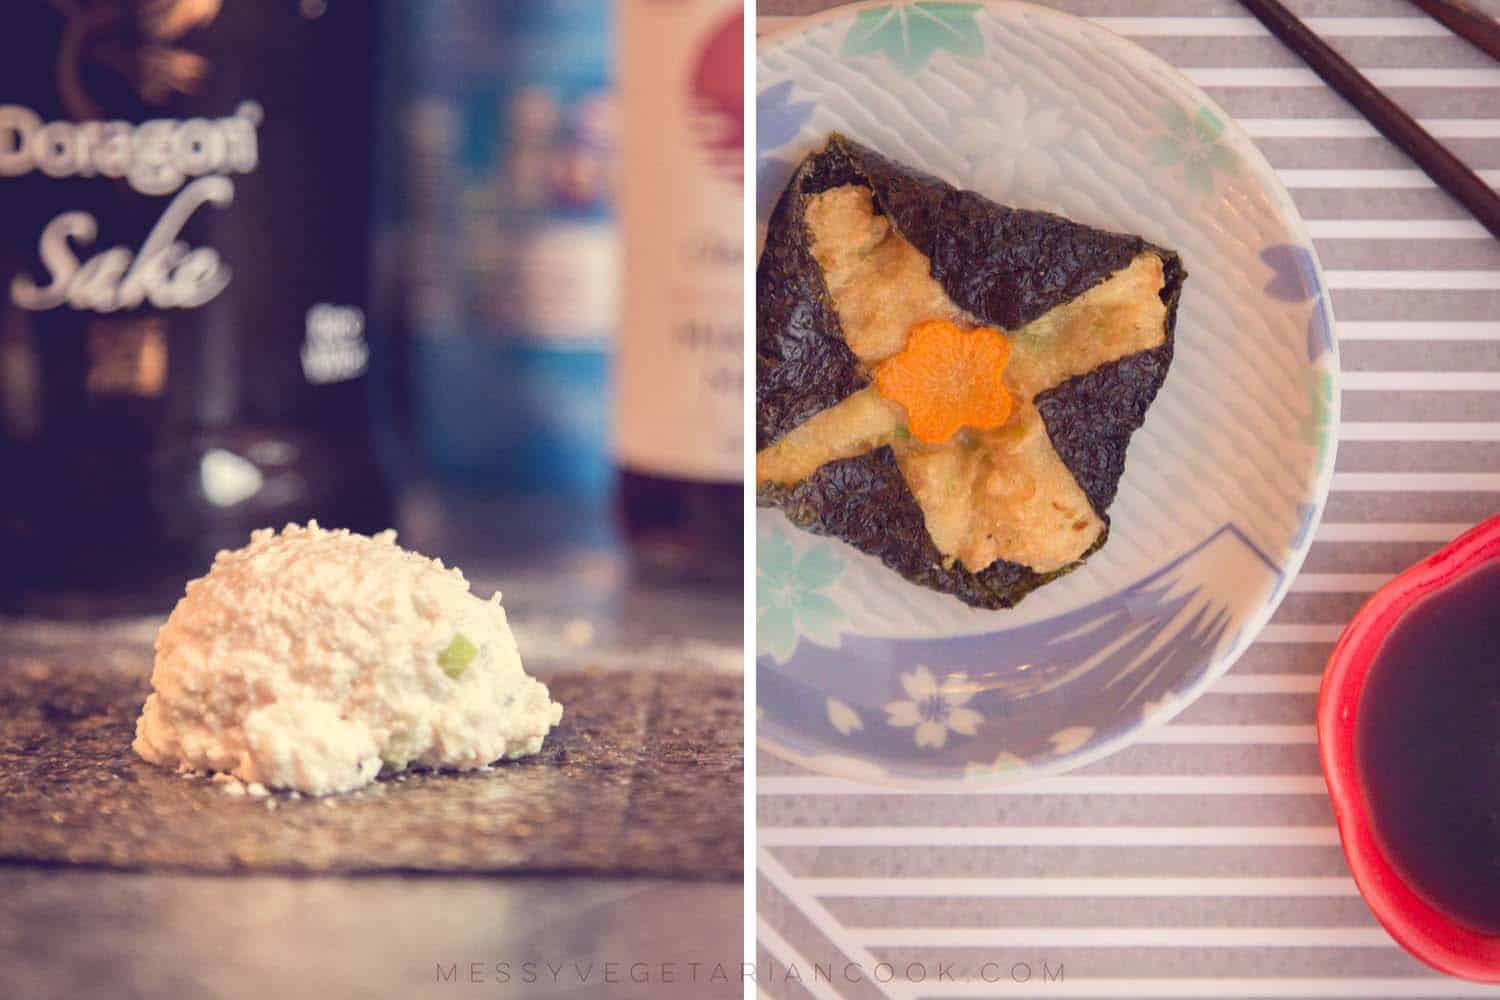 Tofu Nori Parcels inspired by traveling as a vegan in Kyoto